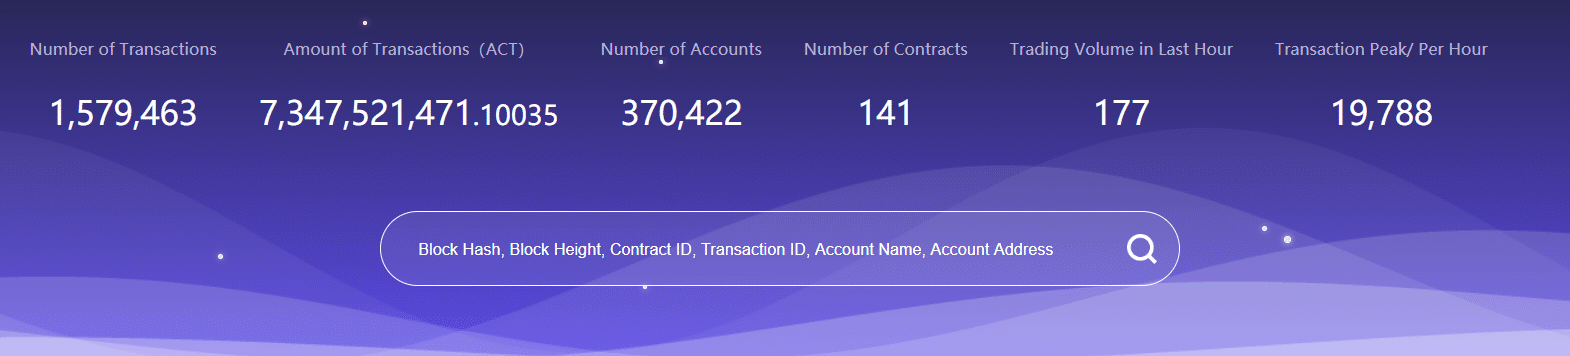 graphic with stats on number of transactions, user accounts, etc.